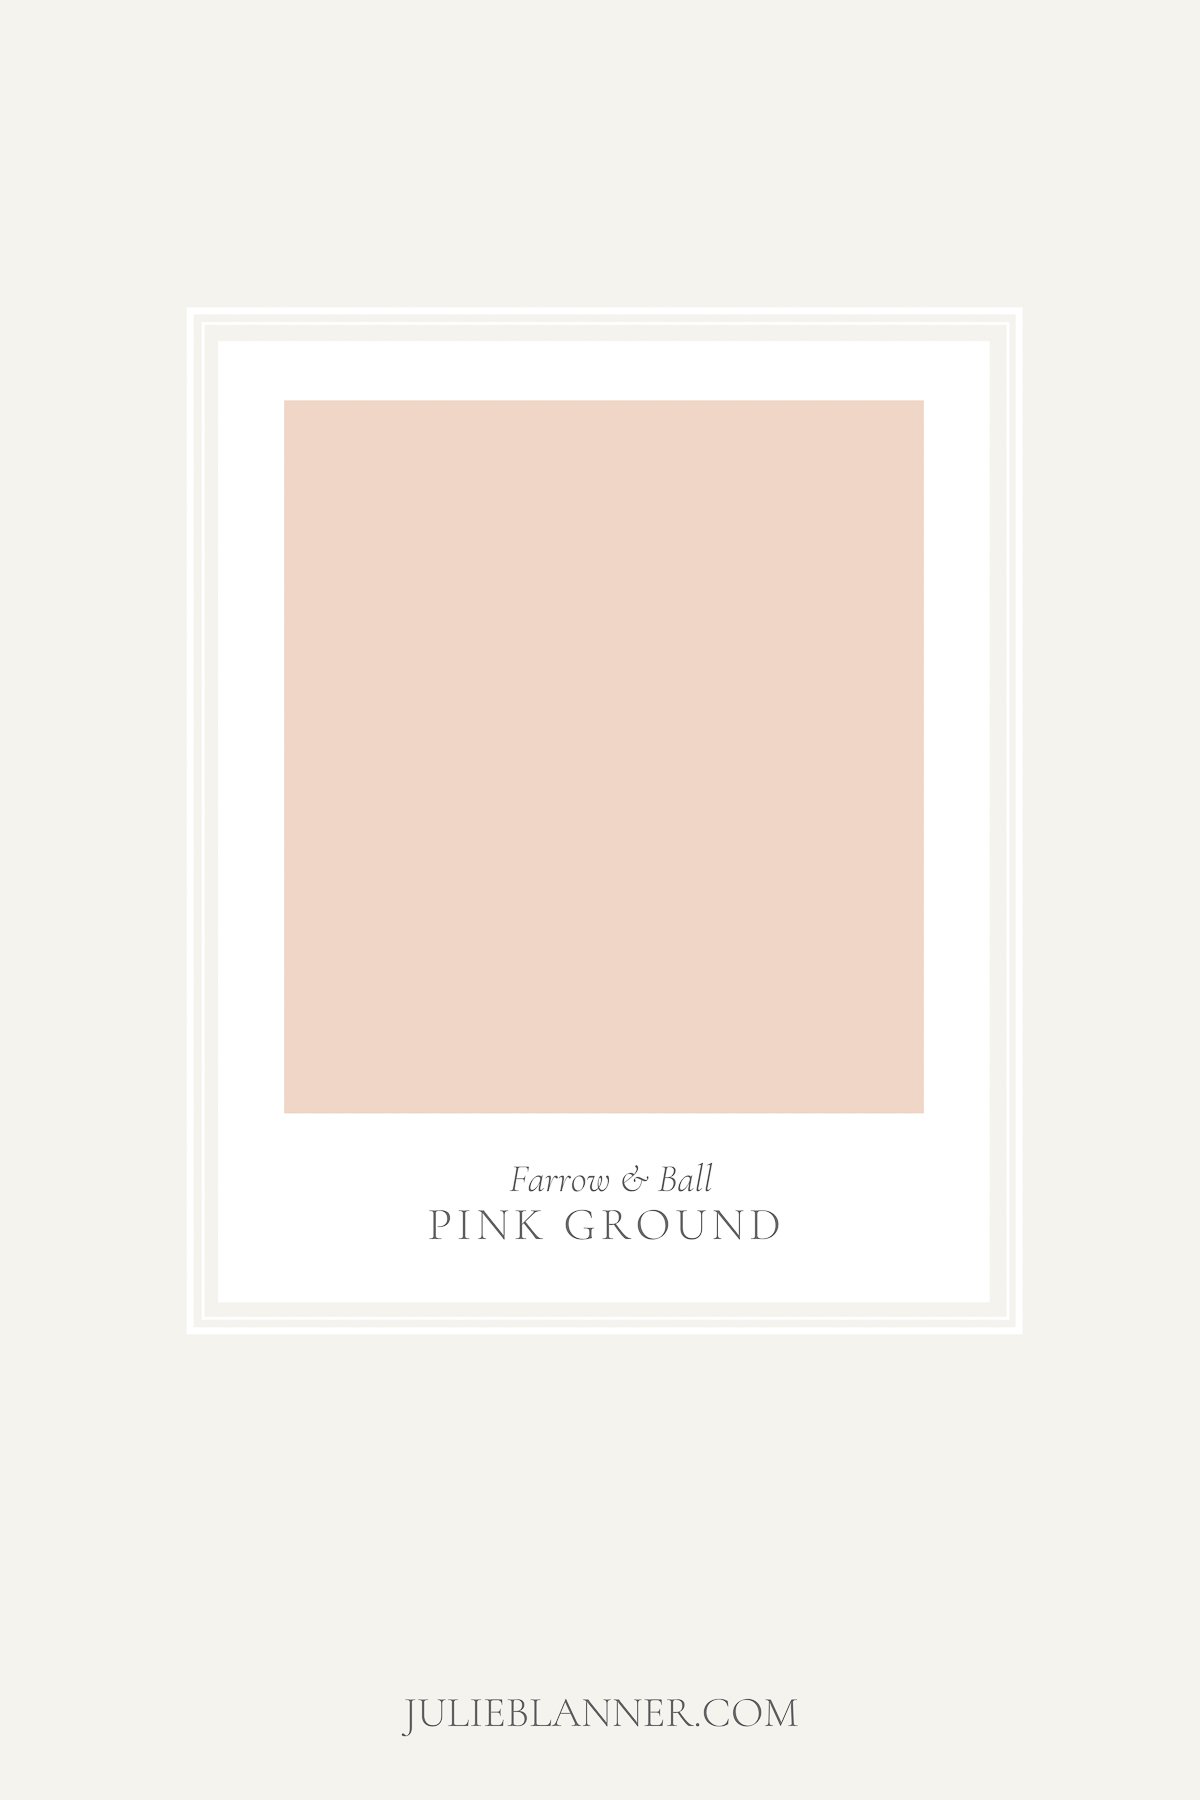 A paint sample card of Farrow and Ball Pink Ground, as part of a blush pink paint guide.